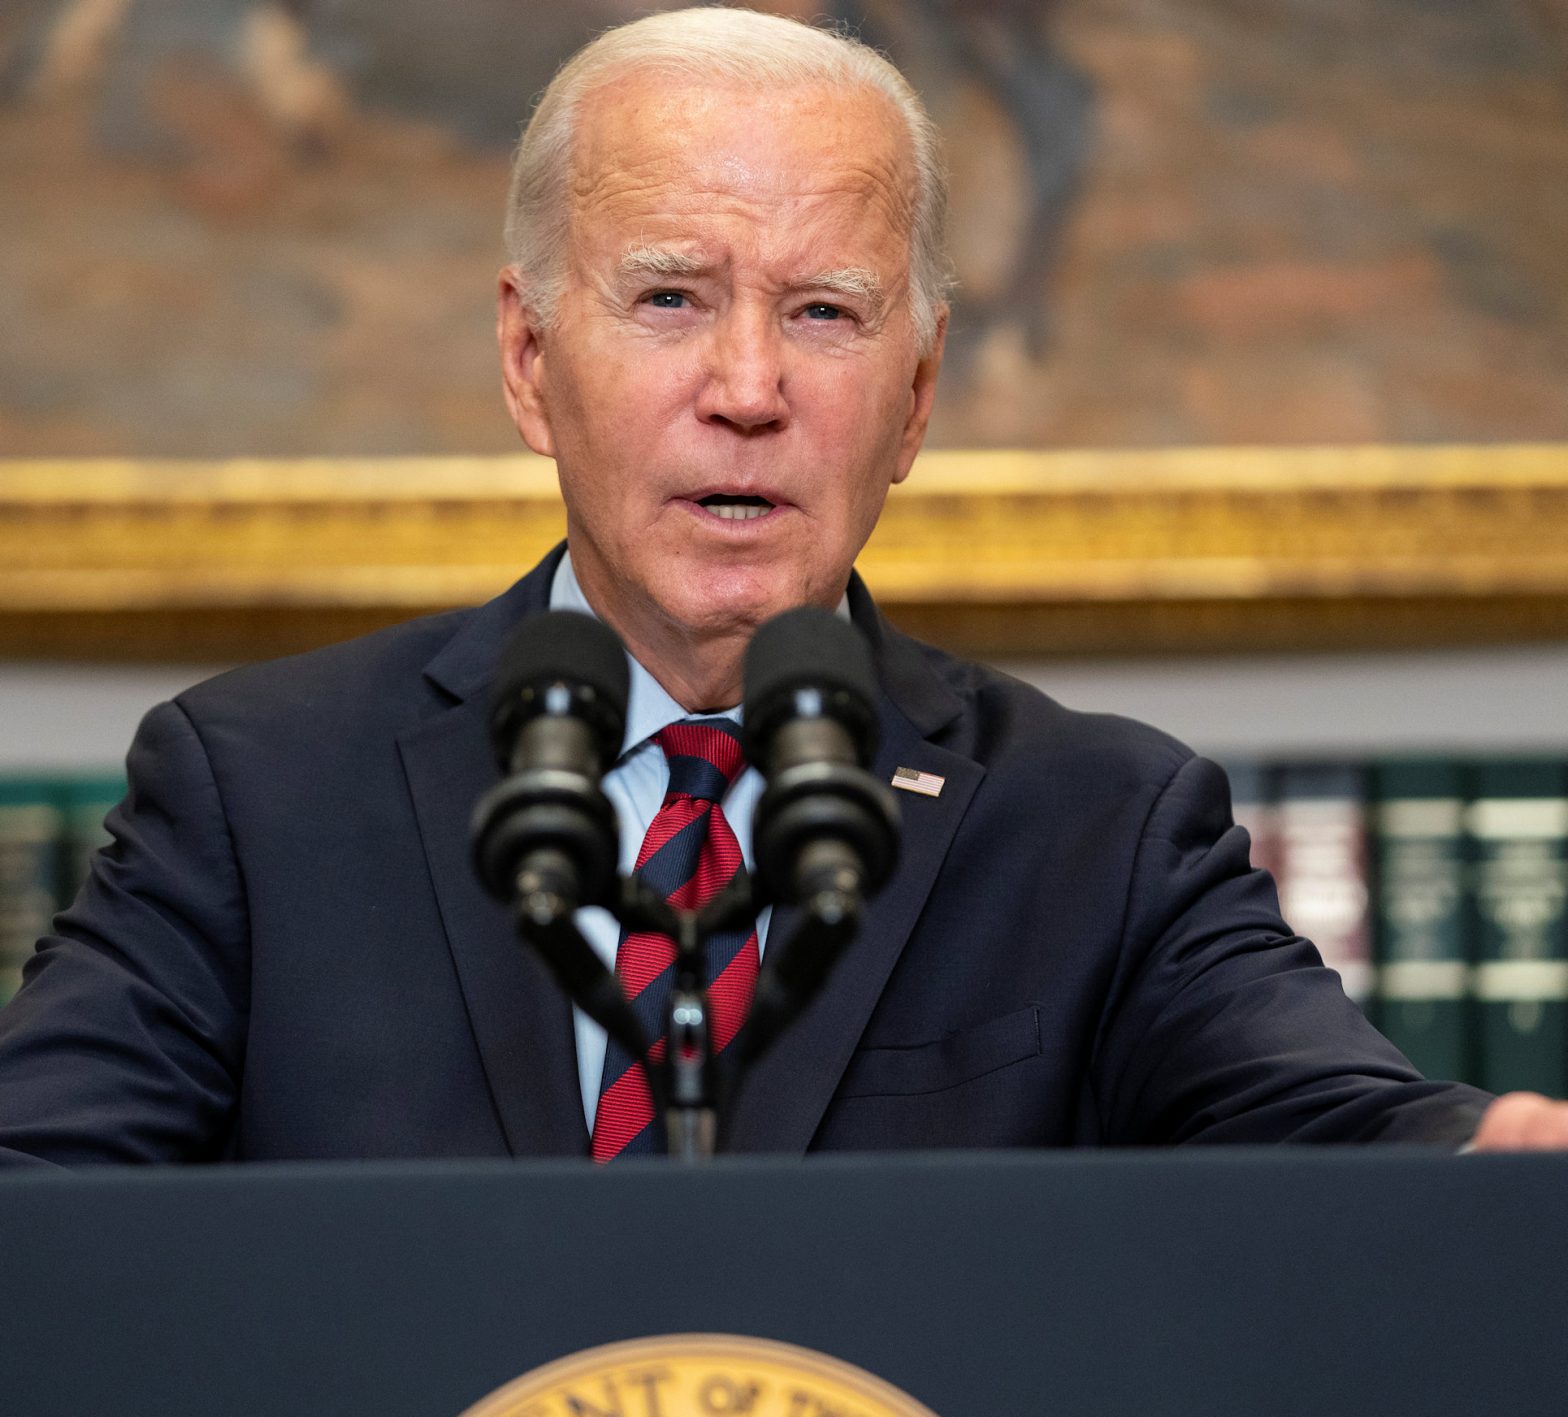 Some Americans Will Get Their Student Loans Canceled in February as Biden Accelerates New Plan